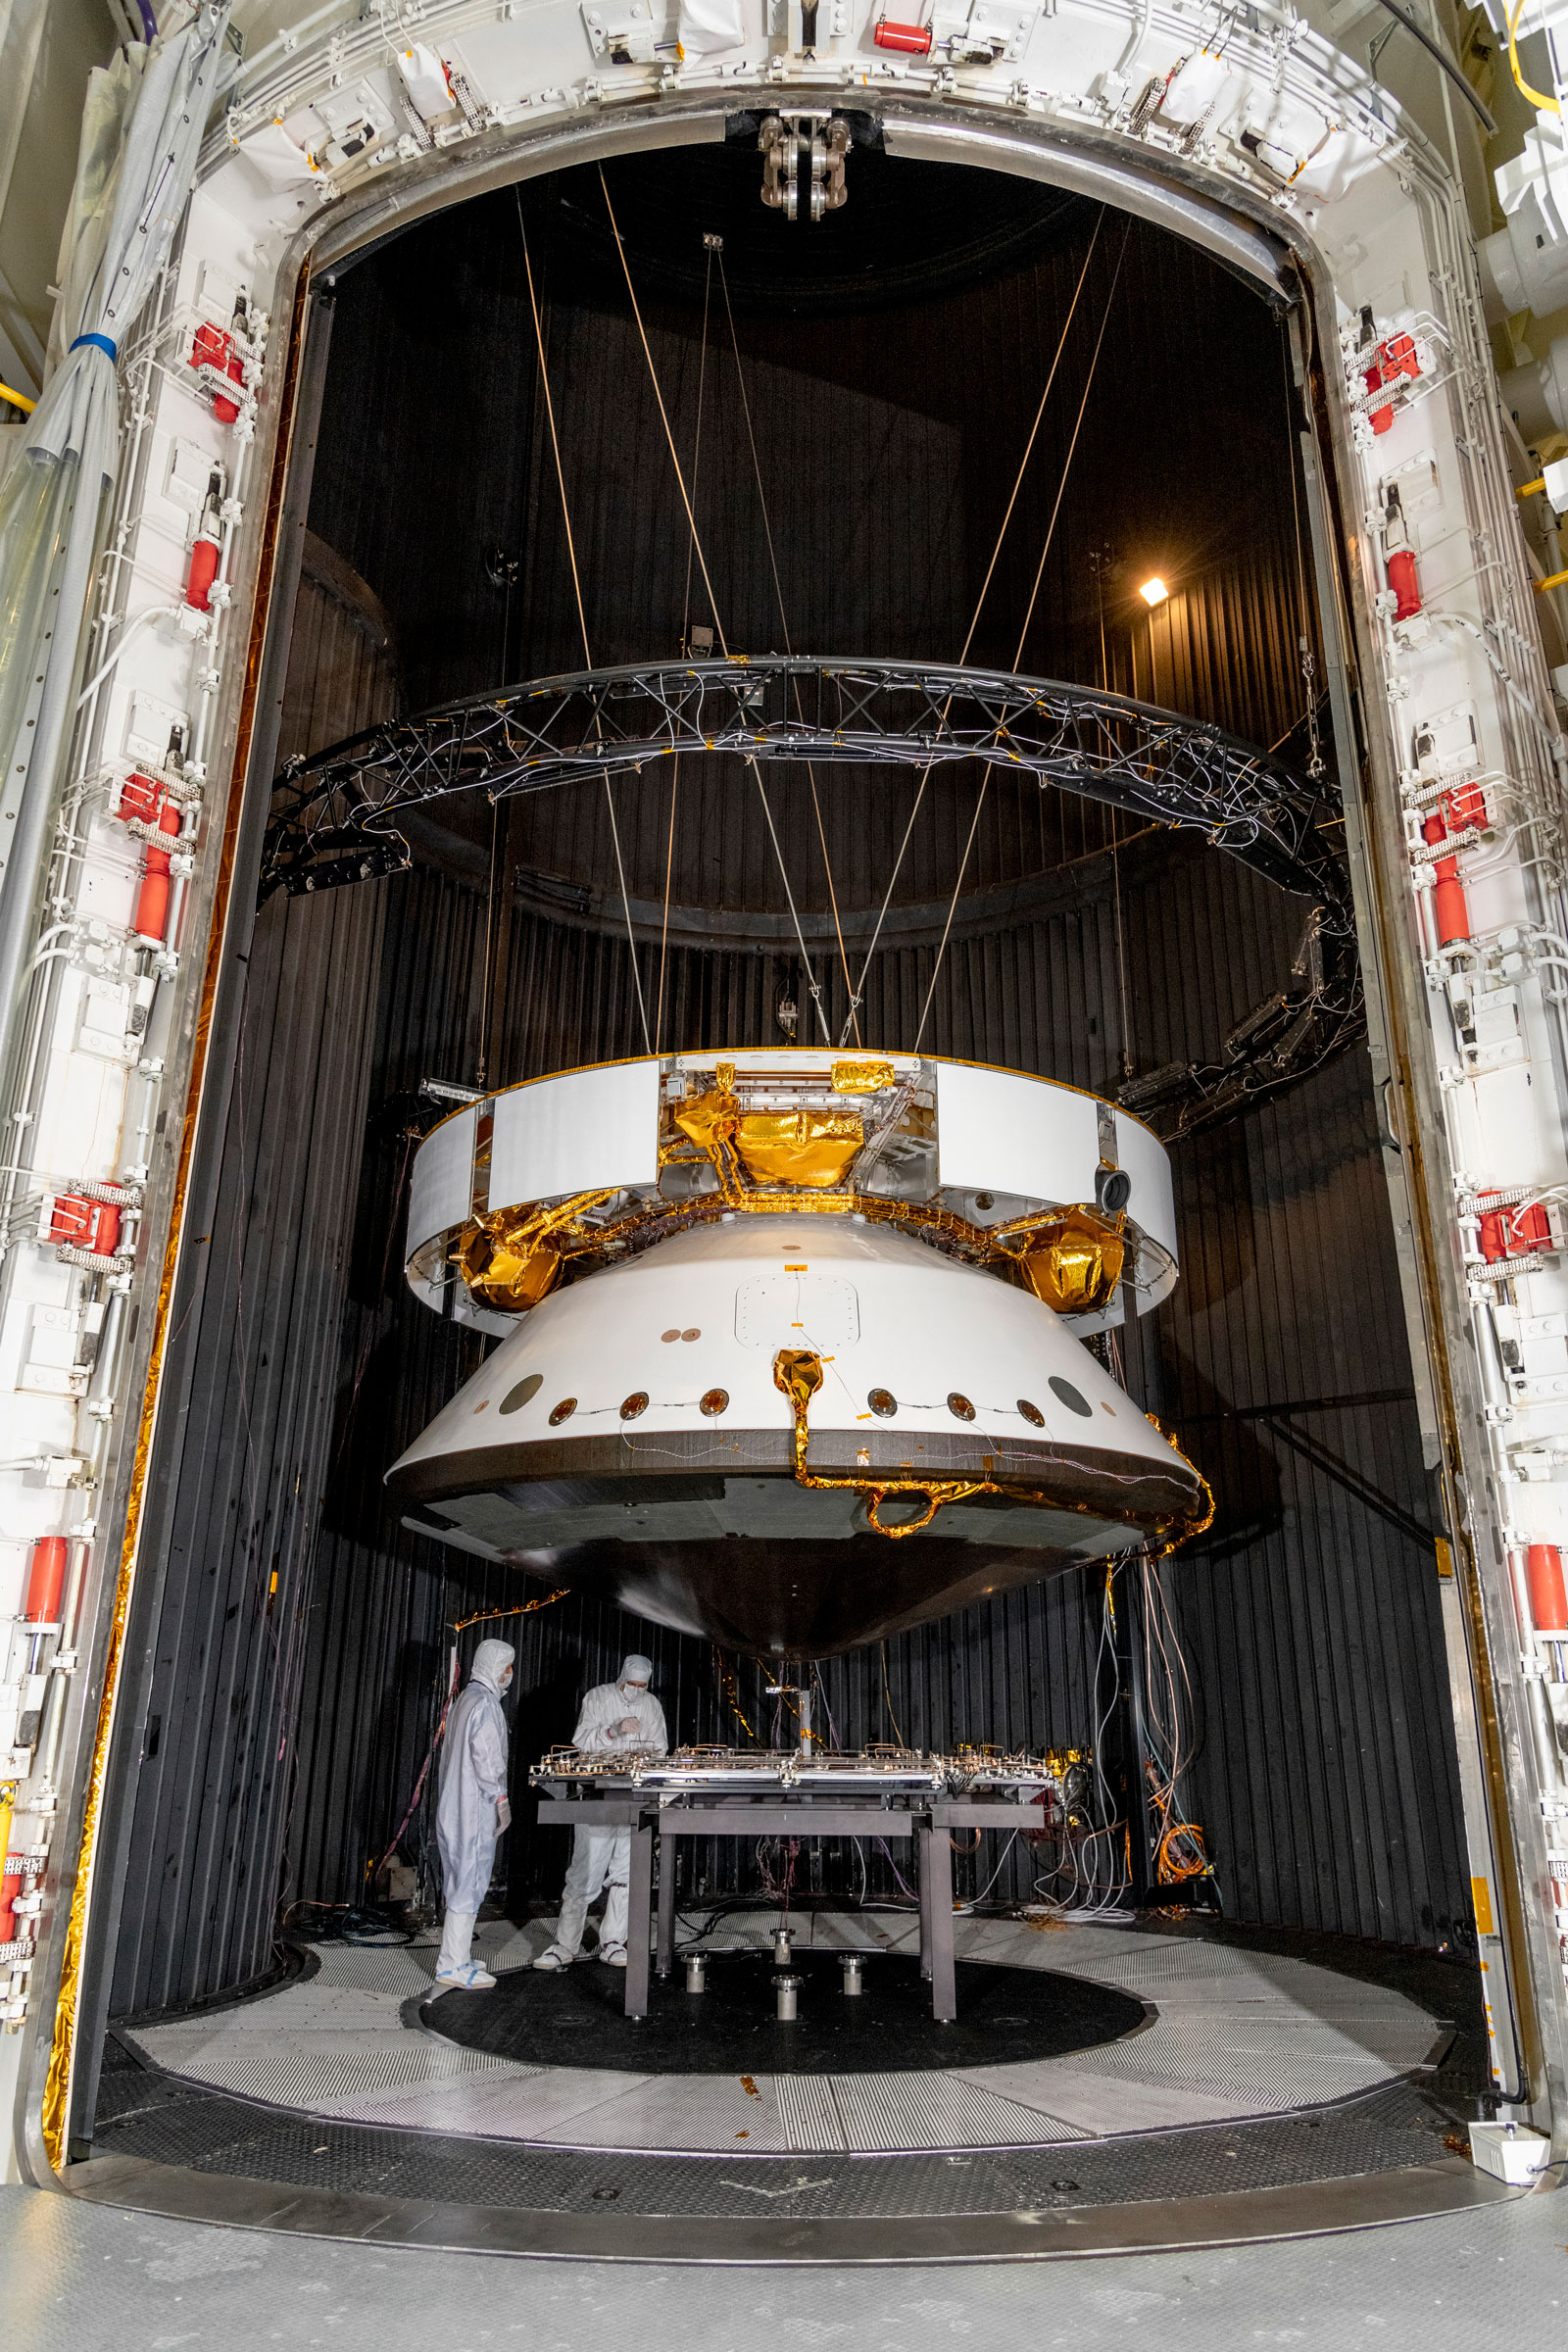 Engineers prepare the Mars 2020 spacecraft for a thermal vacuum (TVAC) test in the Space Simulator Facility at NASA's Jet Propulsion Laboratory in Pasadena, California.